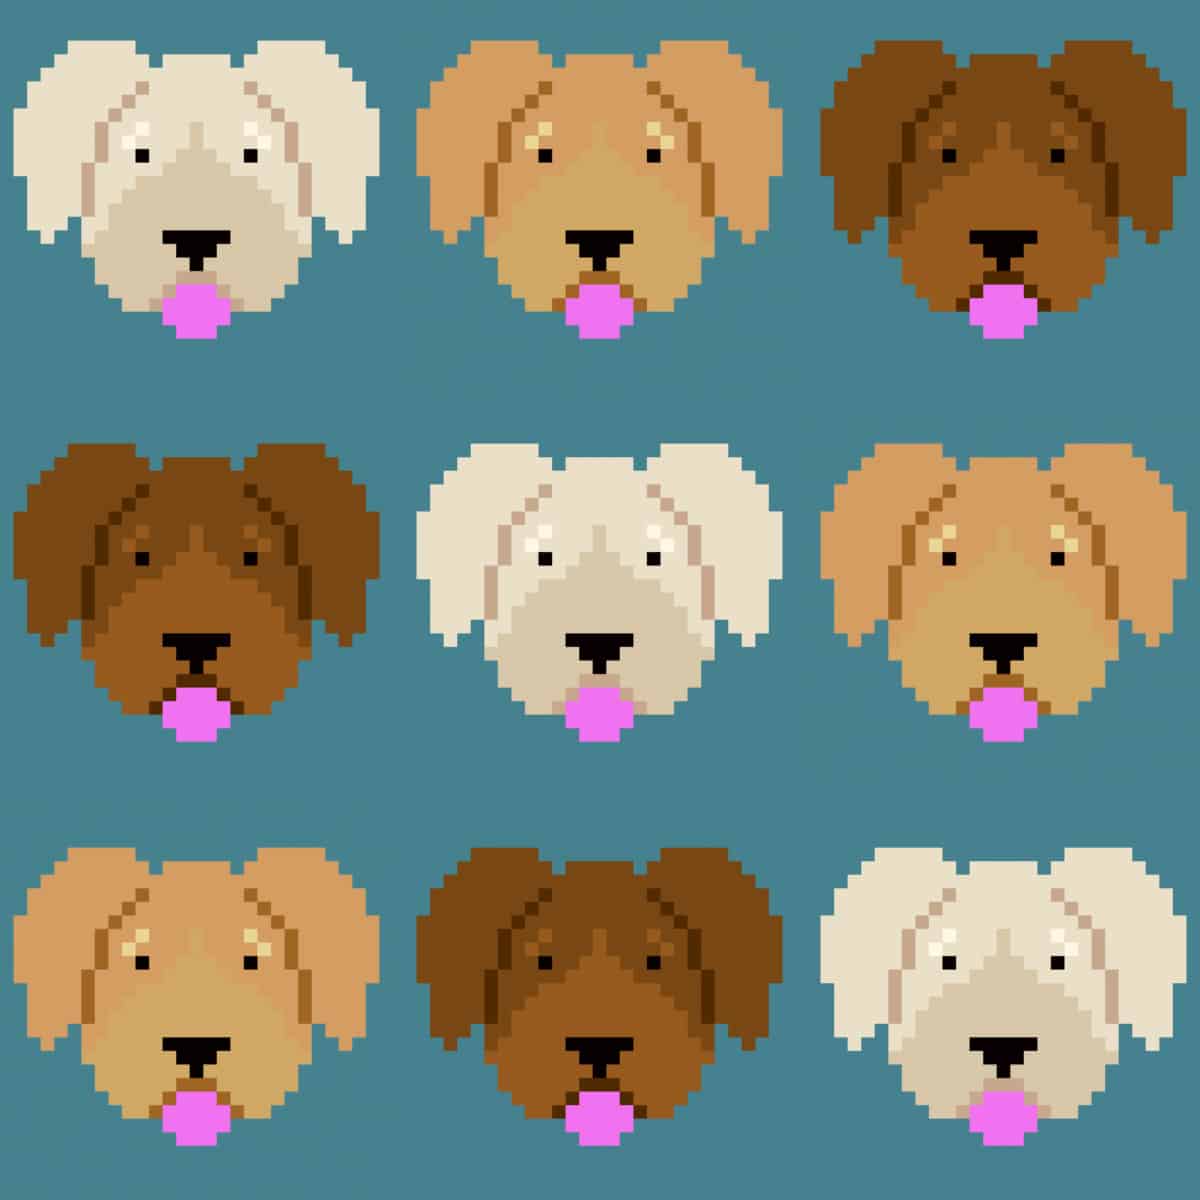 This image shows an example of what a corner to corner crochet dog face blanket would look like with a light brown, tan and dark brown dog face alternating throughout the blanket. The dog faces are on a teal background.